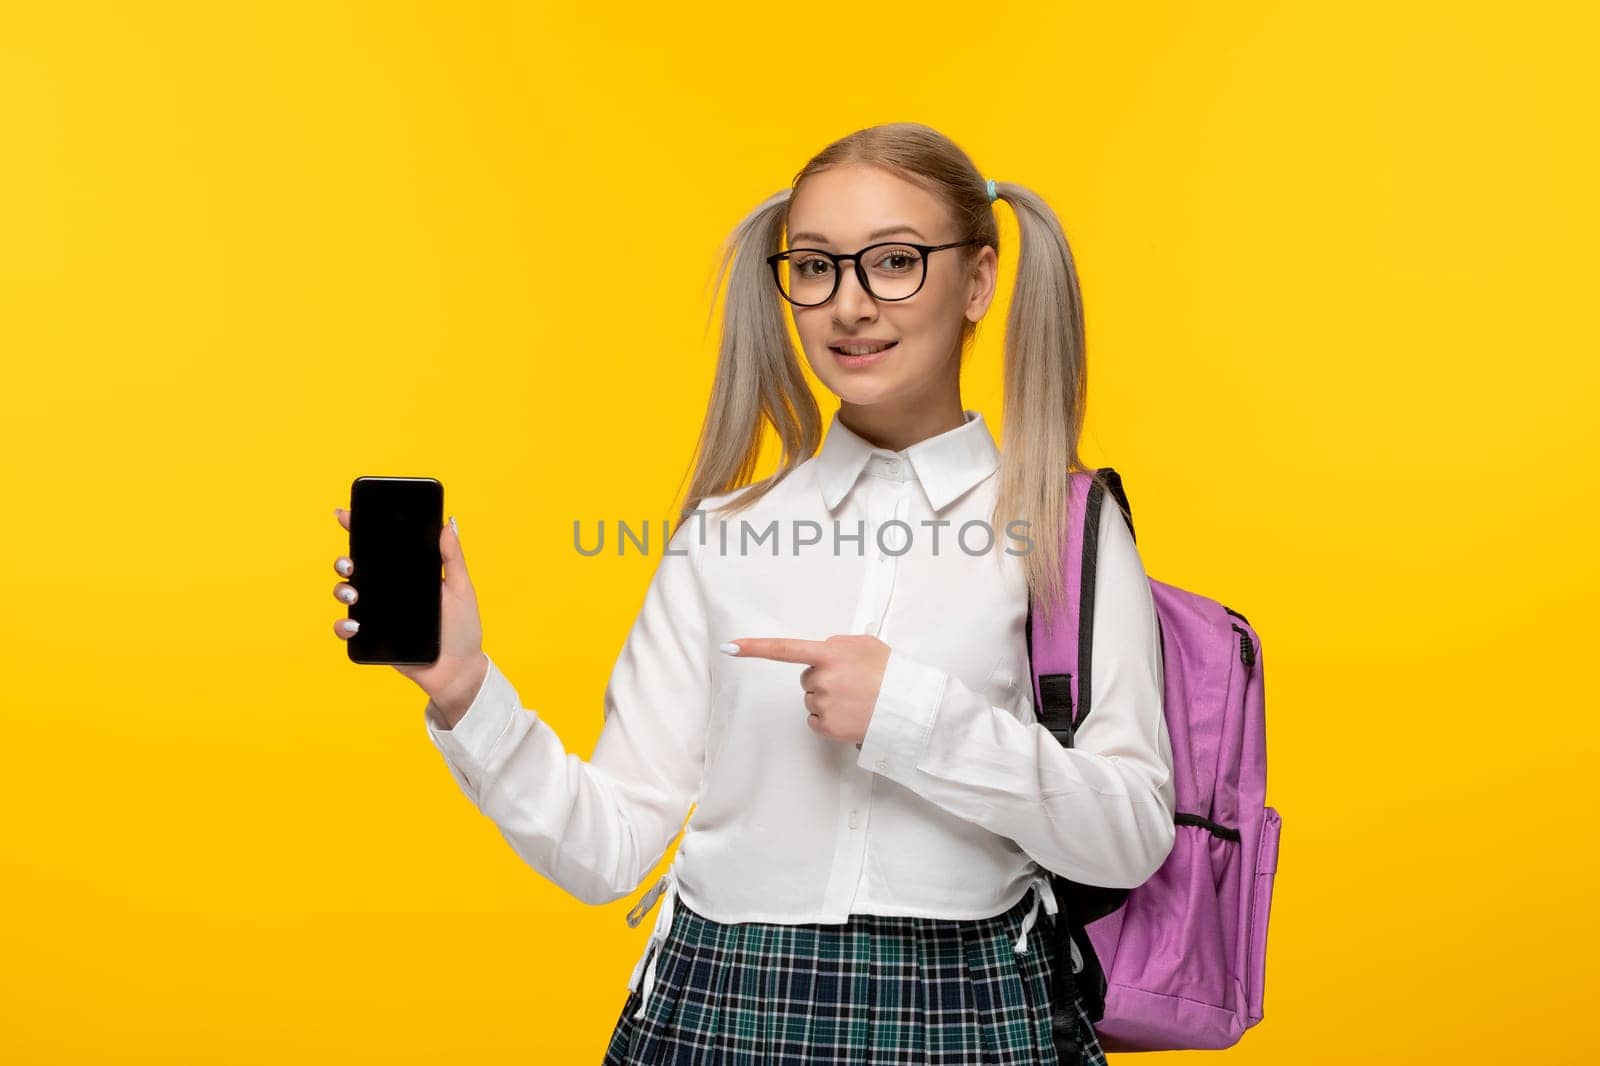 world book day smiling schoolgirl with ponytails showing a cellphone